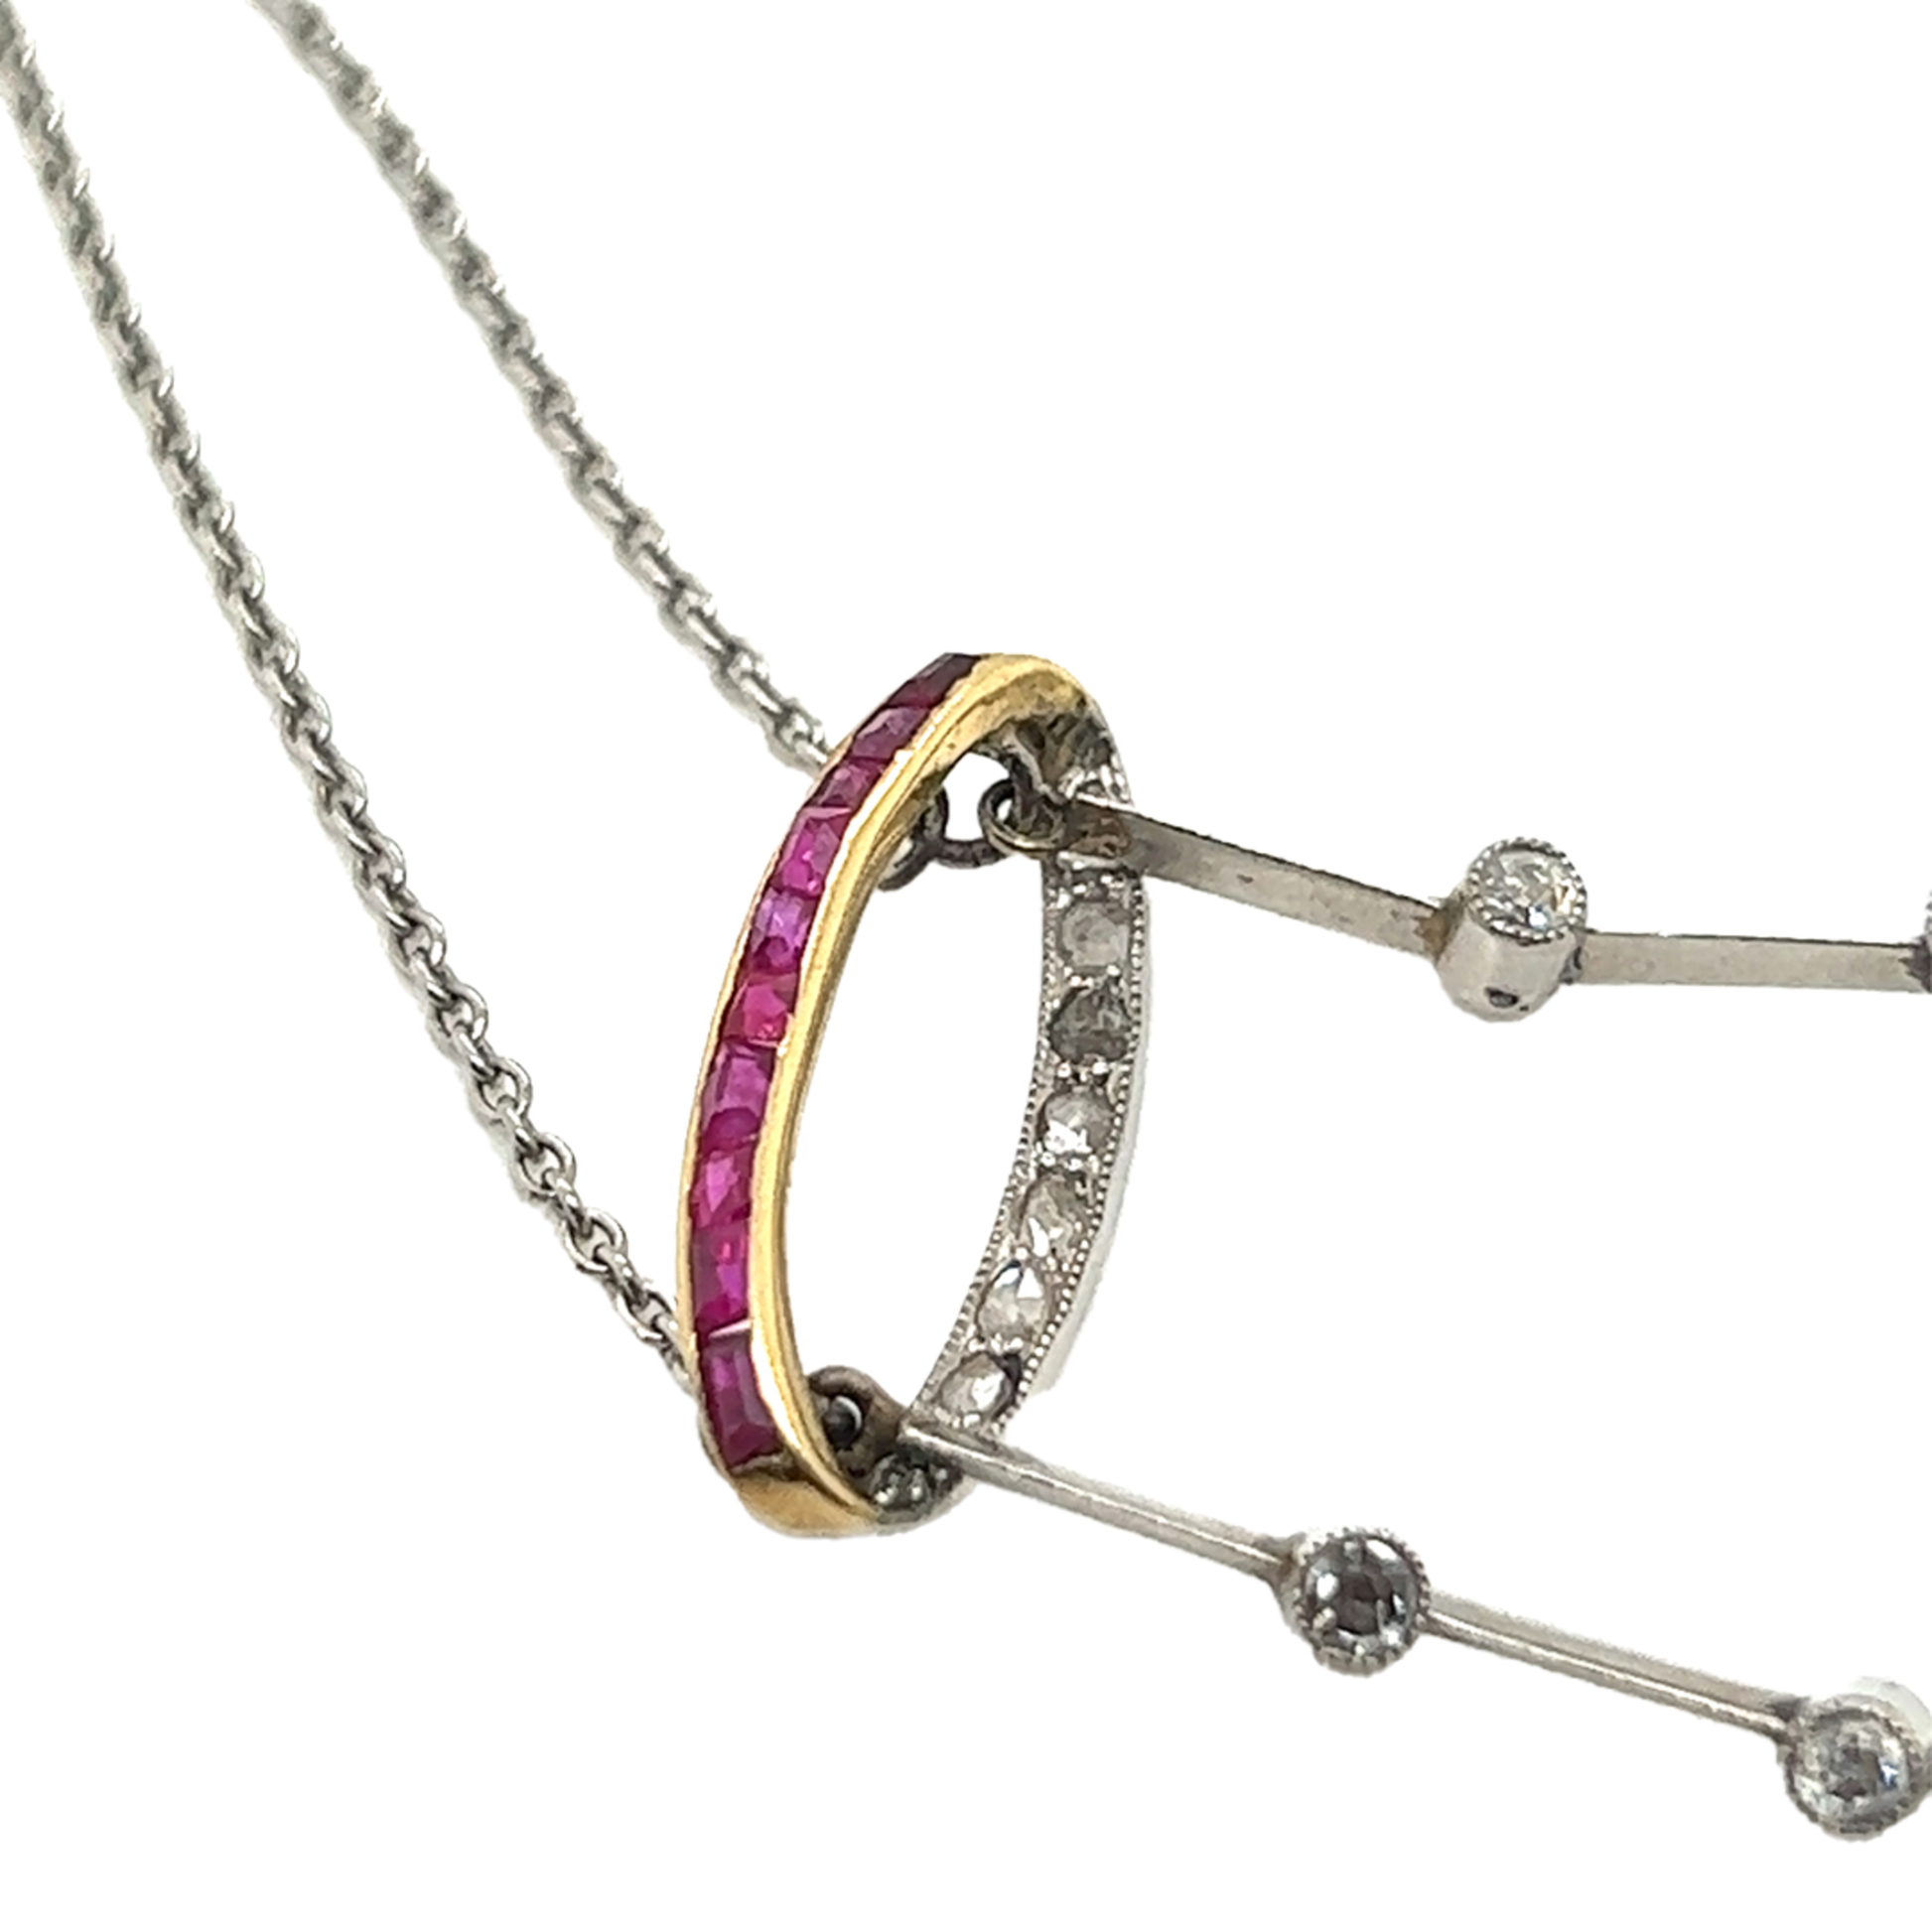 Edwardian Platinum & 18KT Yellow Gold Natural Pearl, Diamond, Ruby & Sapphire Necklace close-up of pendant